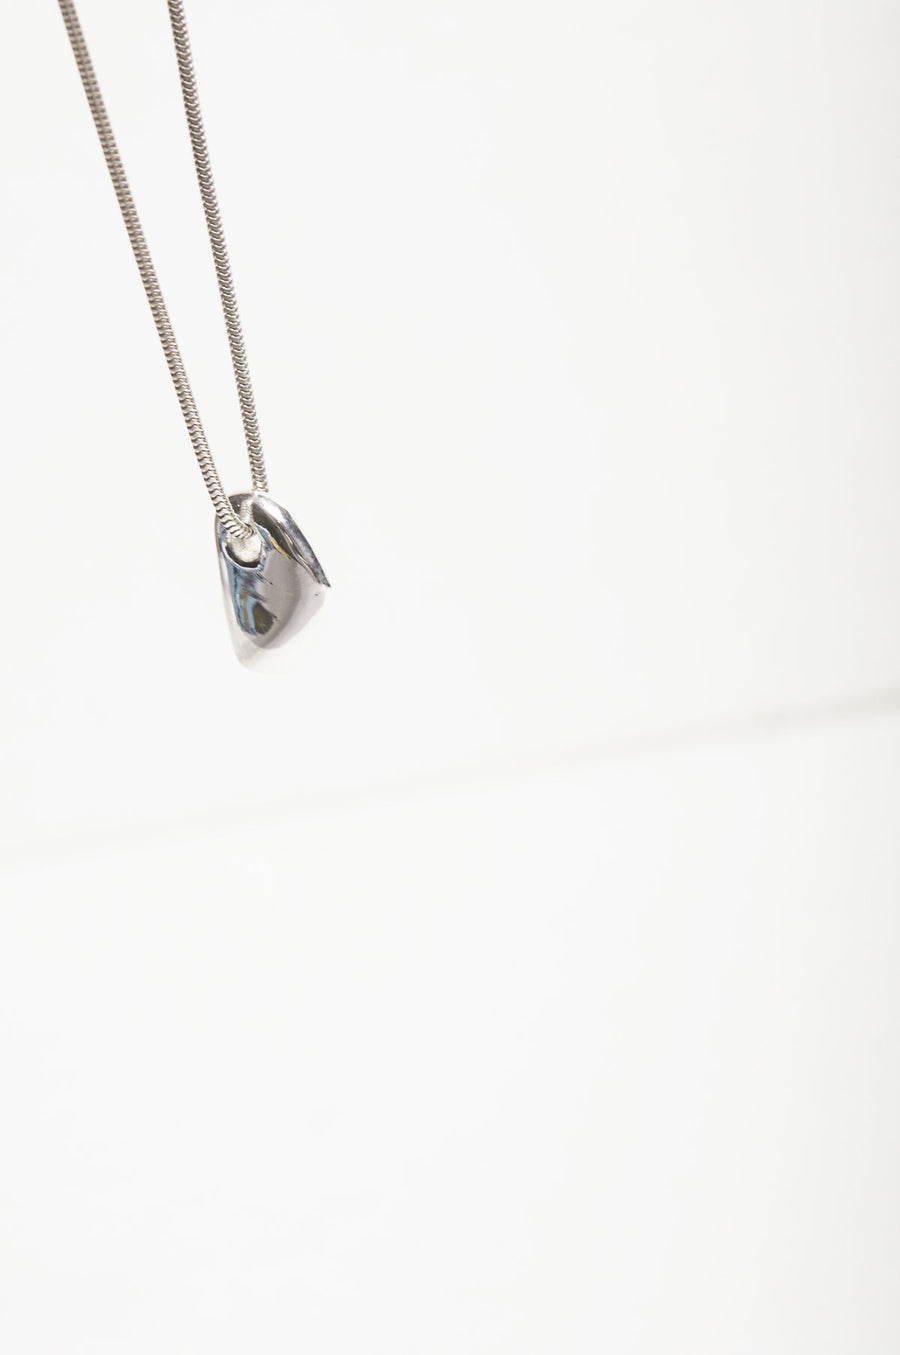 Hernan Herdez- Forma necklace-Jewellery-jewelry-Jeryco Store- London- Necklace-sterling silver necklace- recycled silver necklace- sustainable brand-necklaces for him- necklaces for her-necklaces that are unisex- snake chain necklace